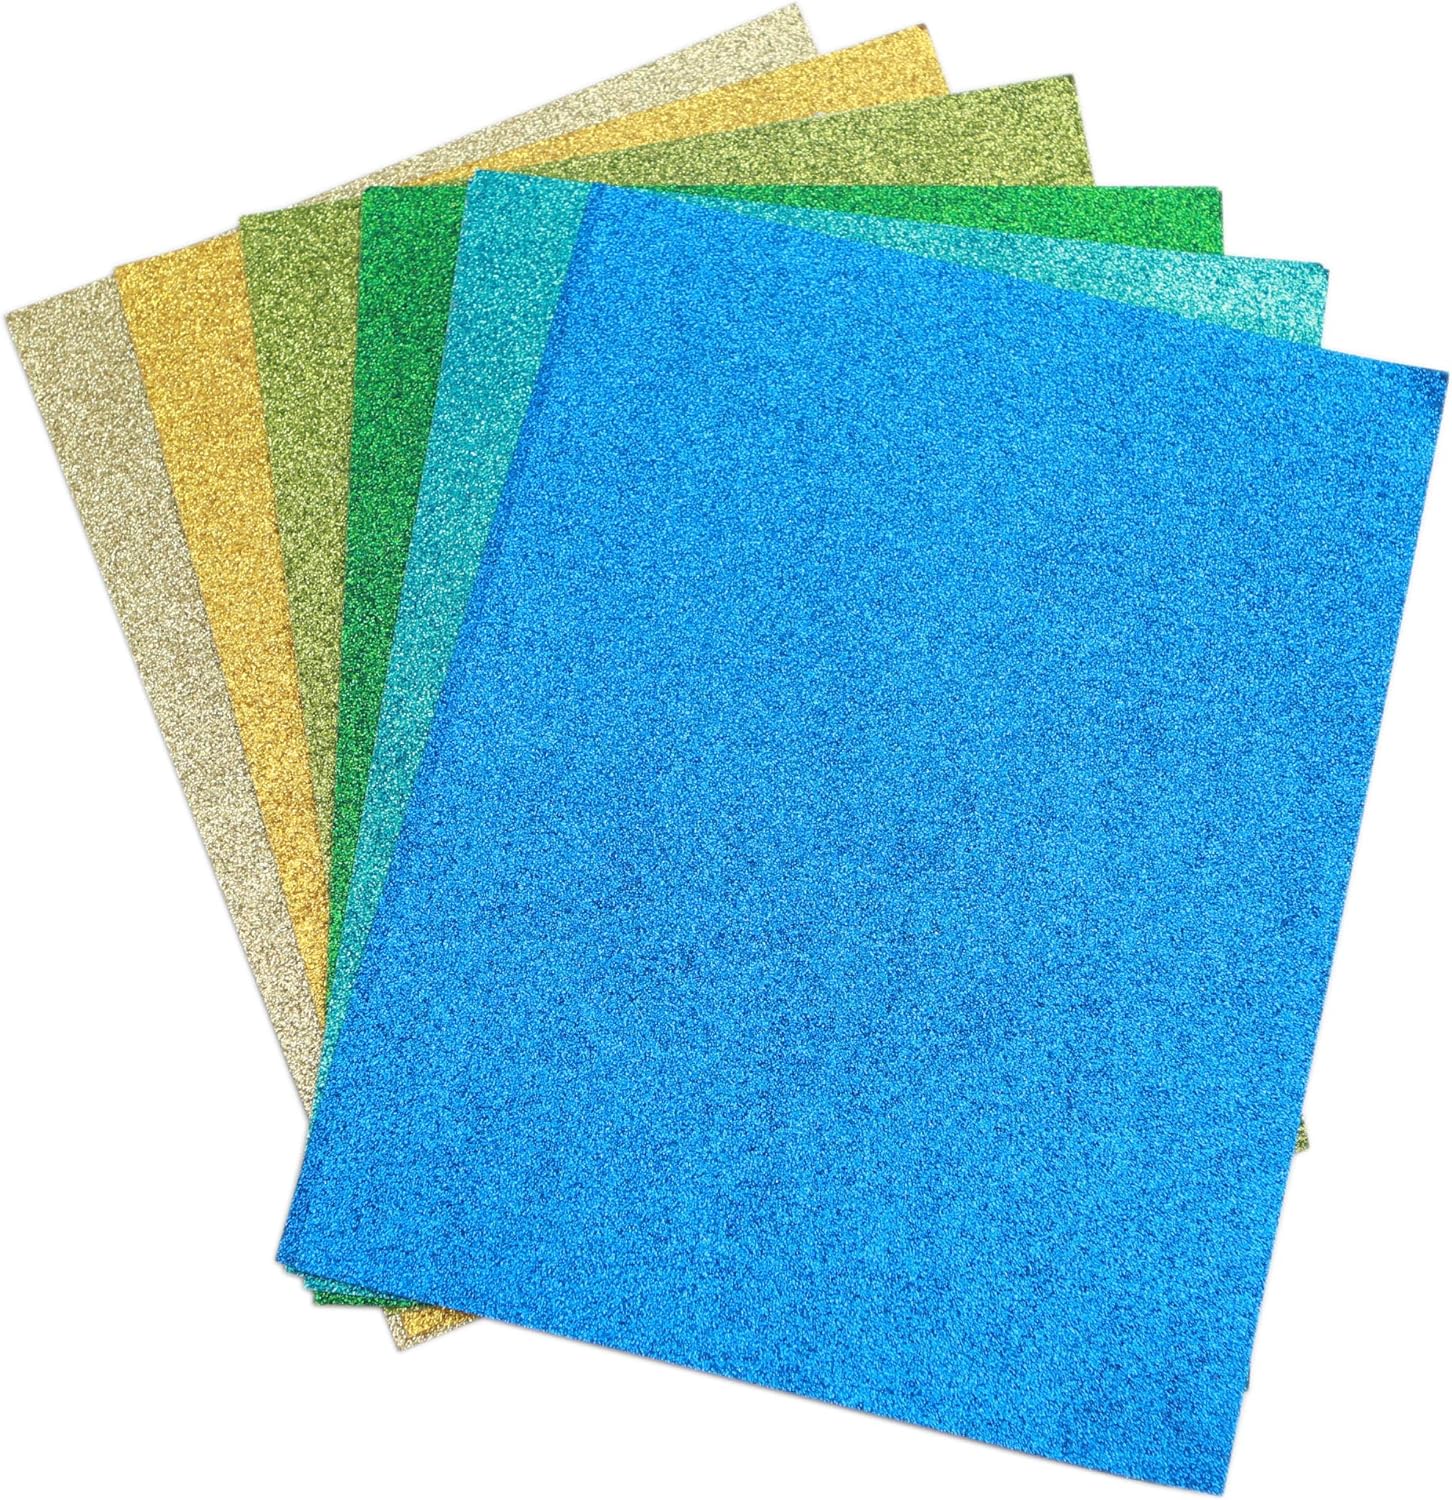 16 Pack Glitter Eva Foam Handicraft Sheets Non-adhesive 8.5x11 Inches Thick And Soft Paper For DIY Projects 12 Assorted Colors By PAIDU